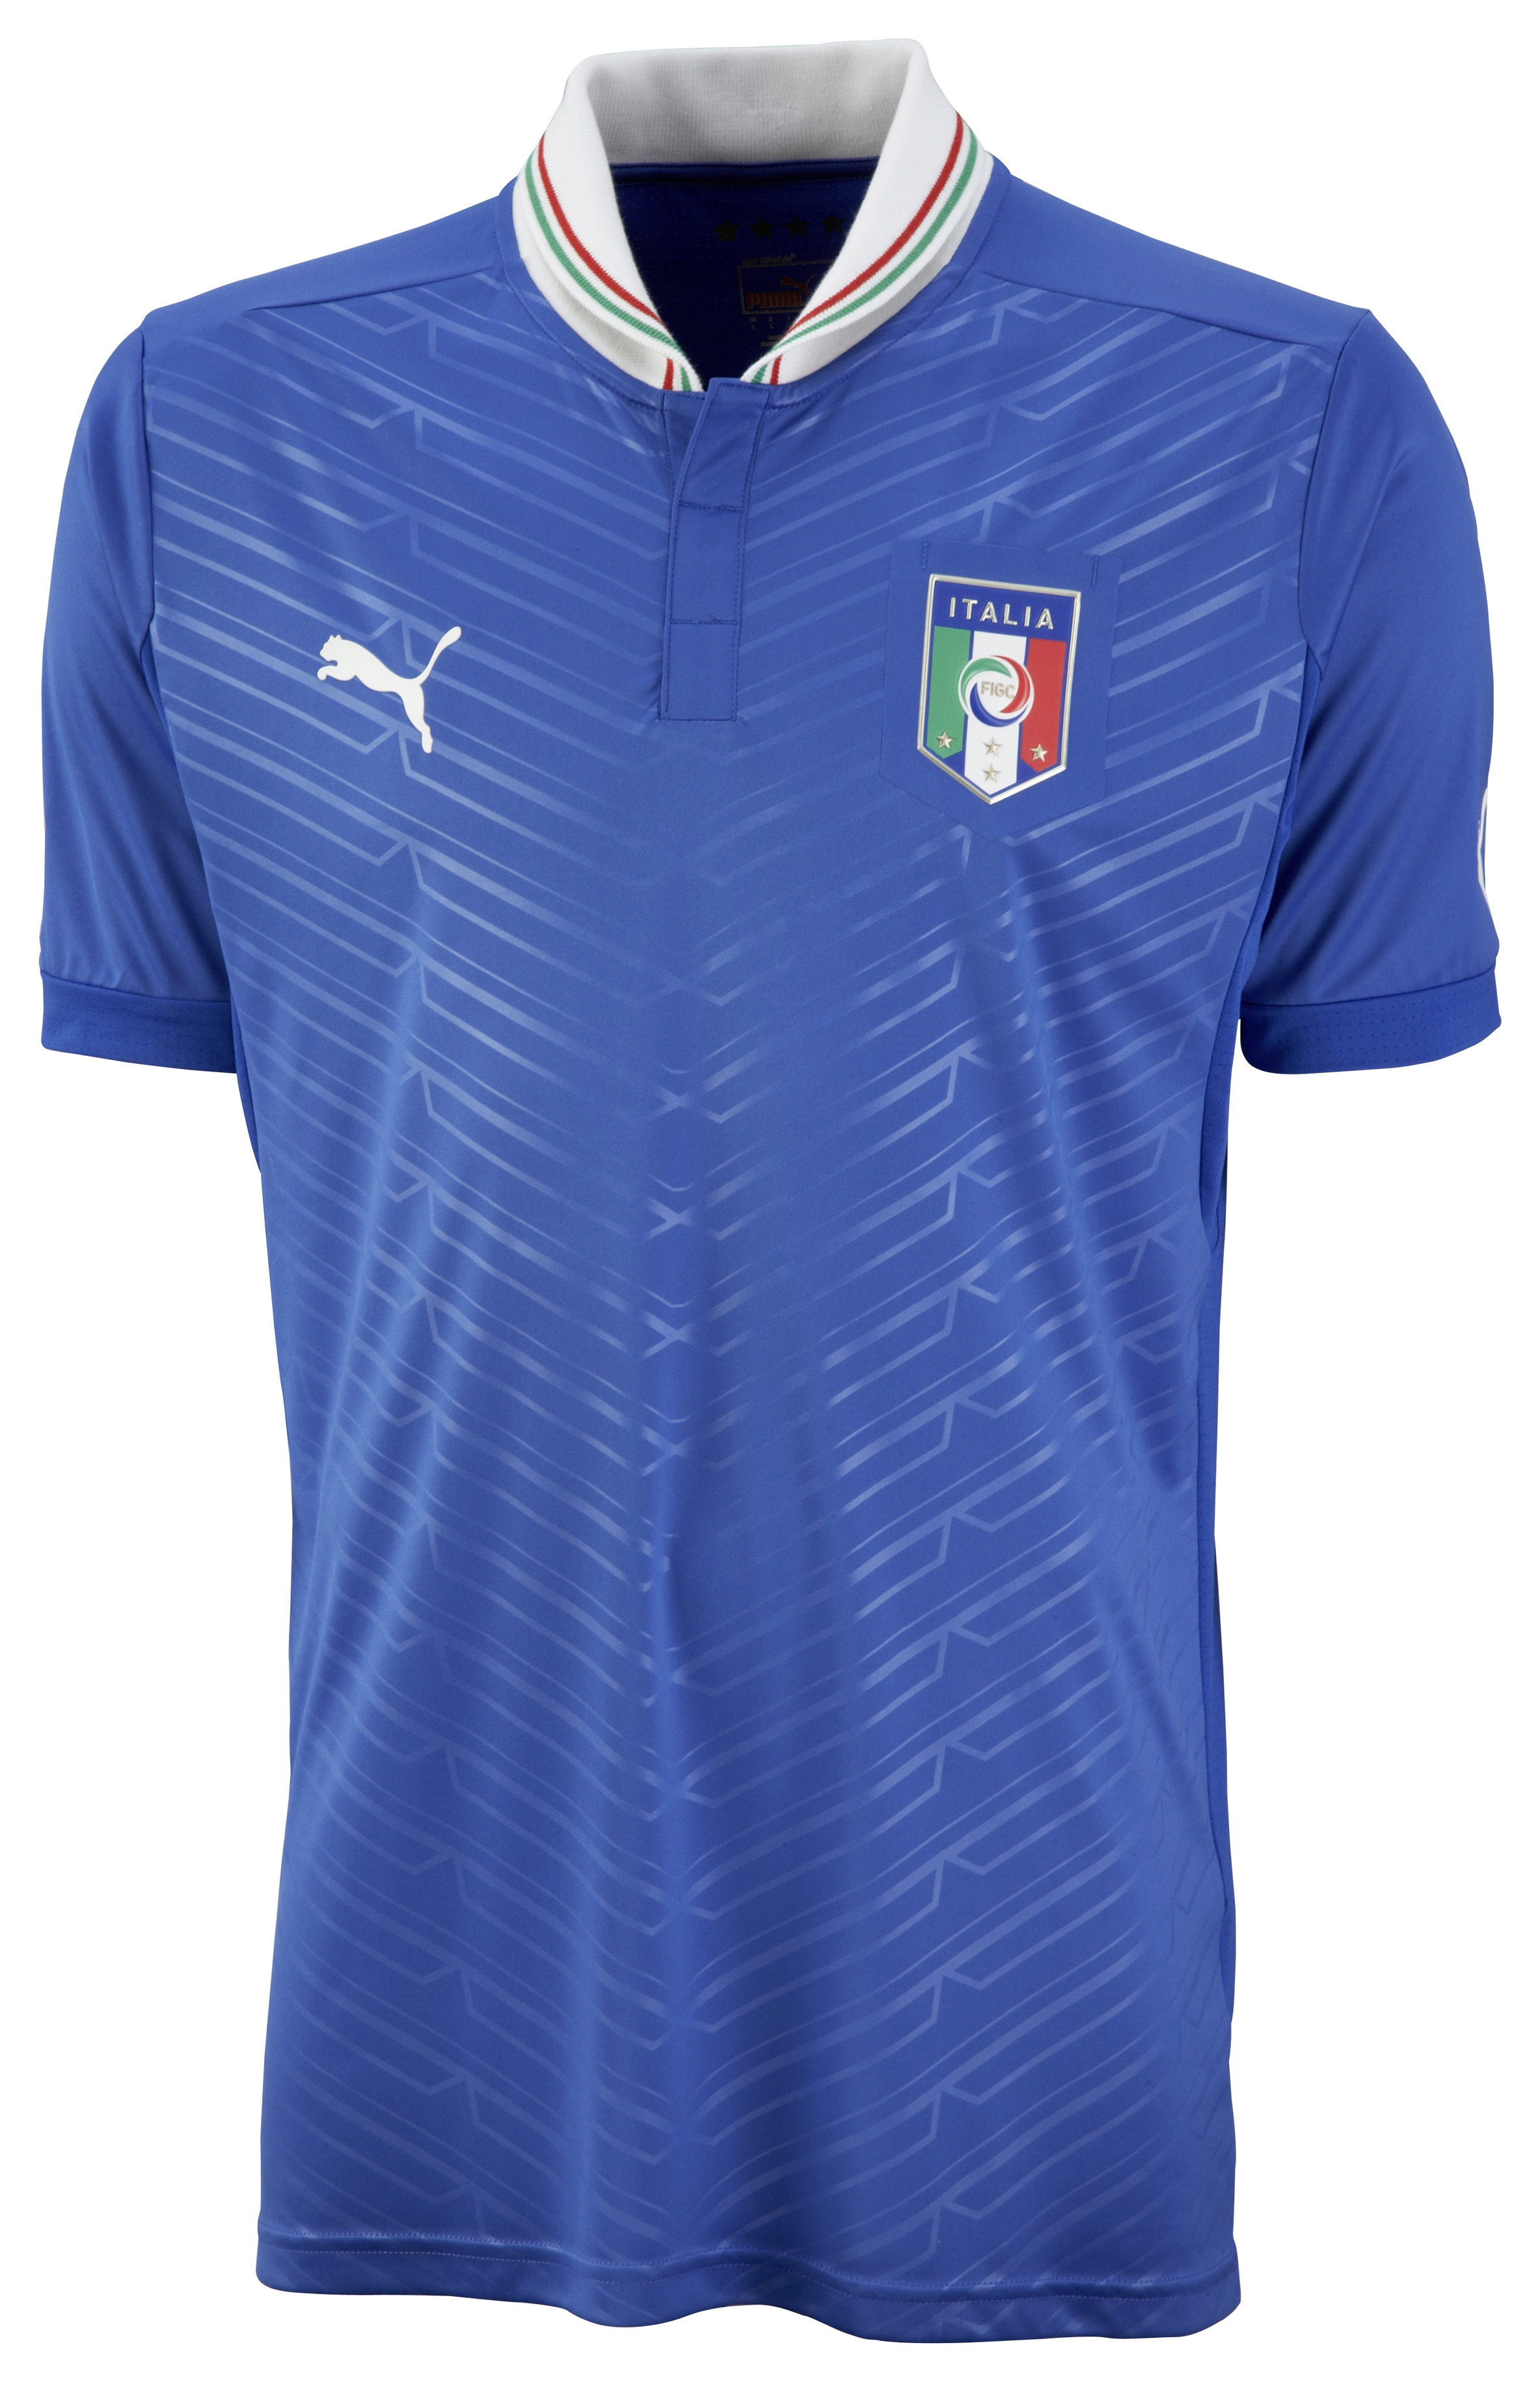 release: SportLocker kit launch home PUMA 2012 for Football Euro new kit – Italy